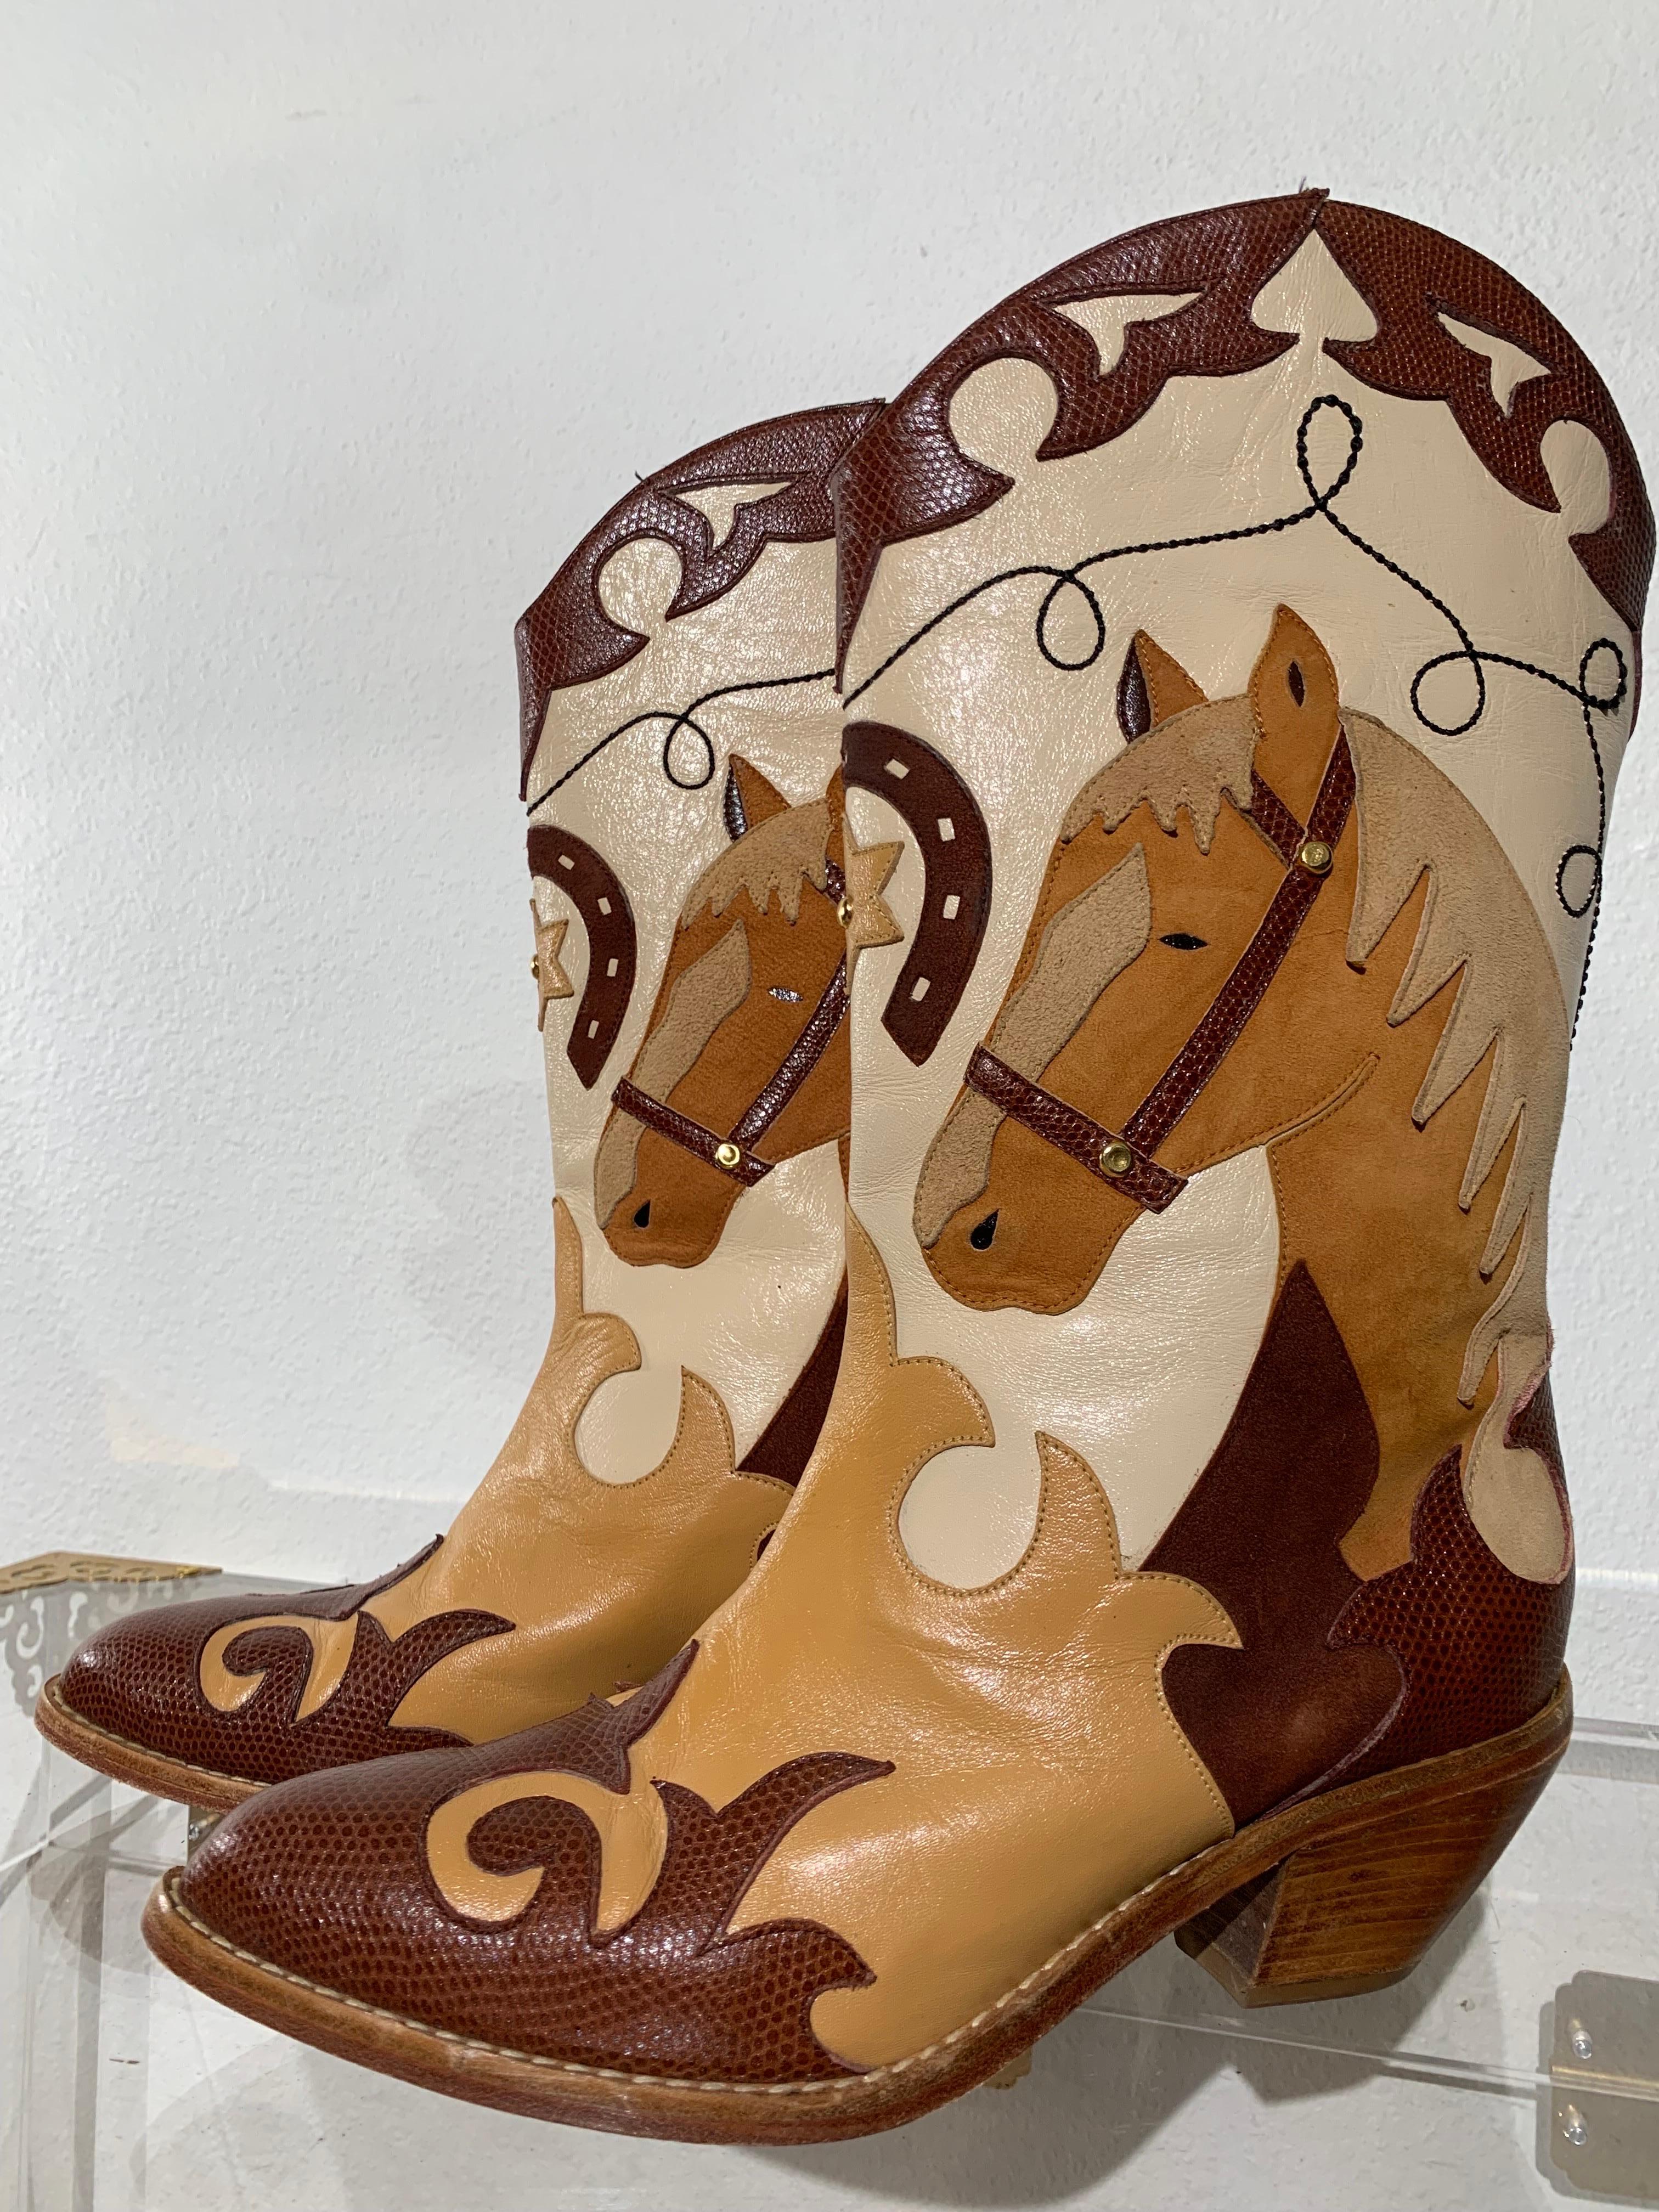 1980s Western Cowboy Horse Motif Short Boots w Leather Applique Design:  Zalo label cowboy boots with a fabulously detailed horse image on side. Pointed toe, 
Cuban-heel, mid-calf length boots in shades of brown and cream with top stitching and gold